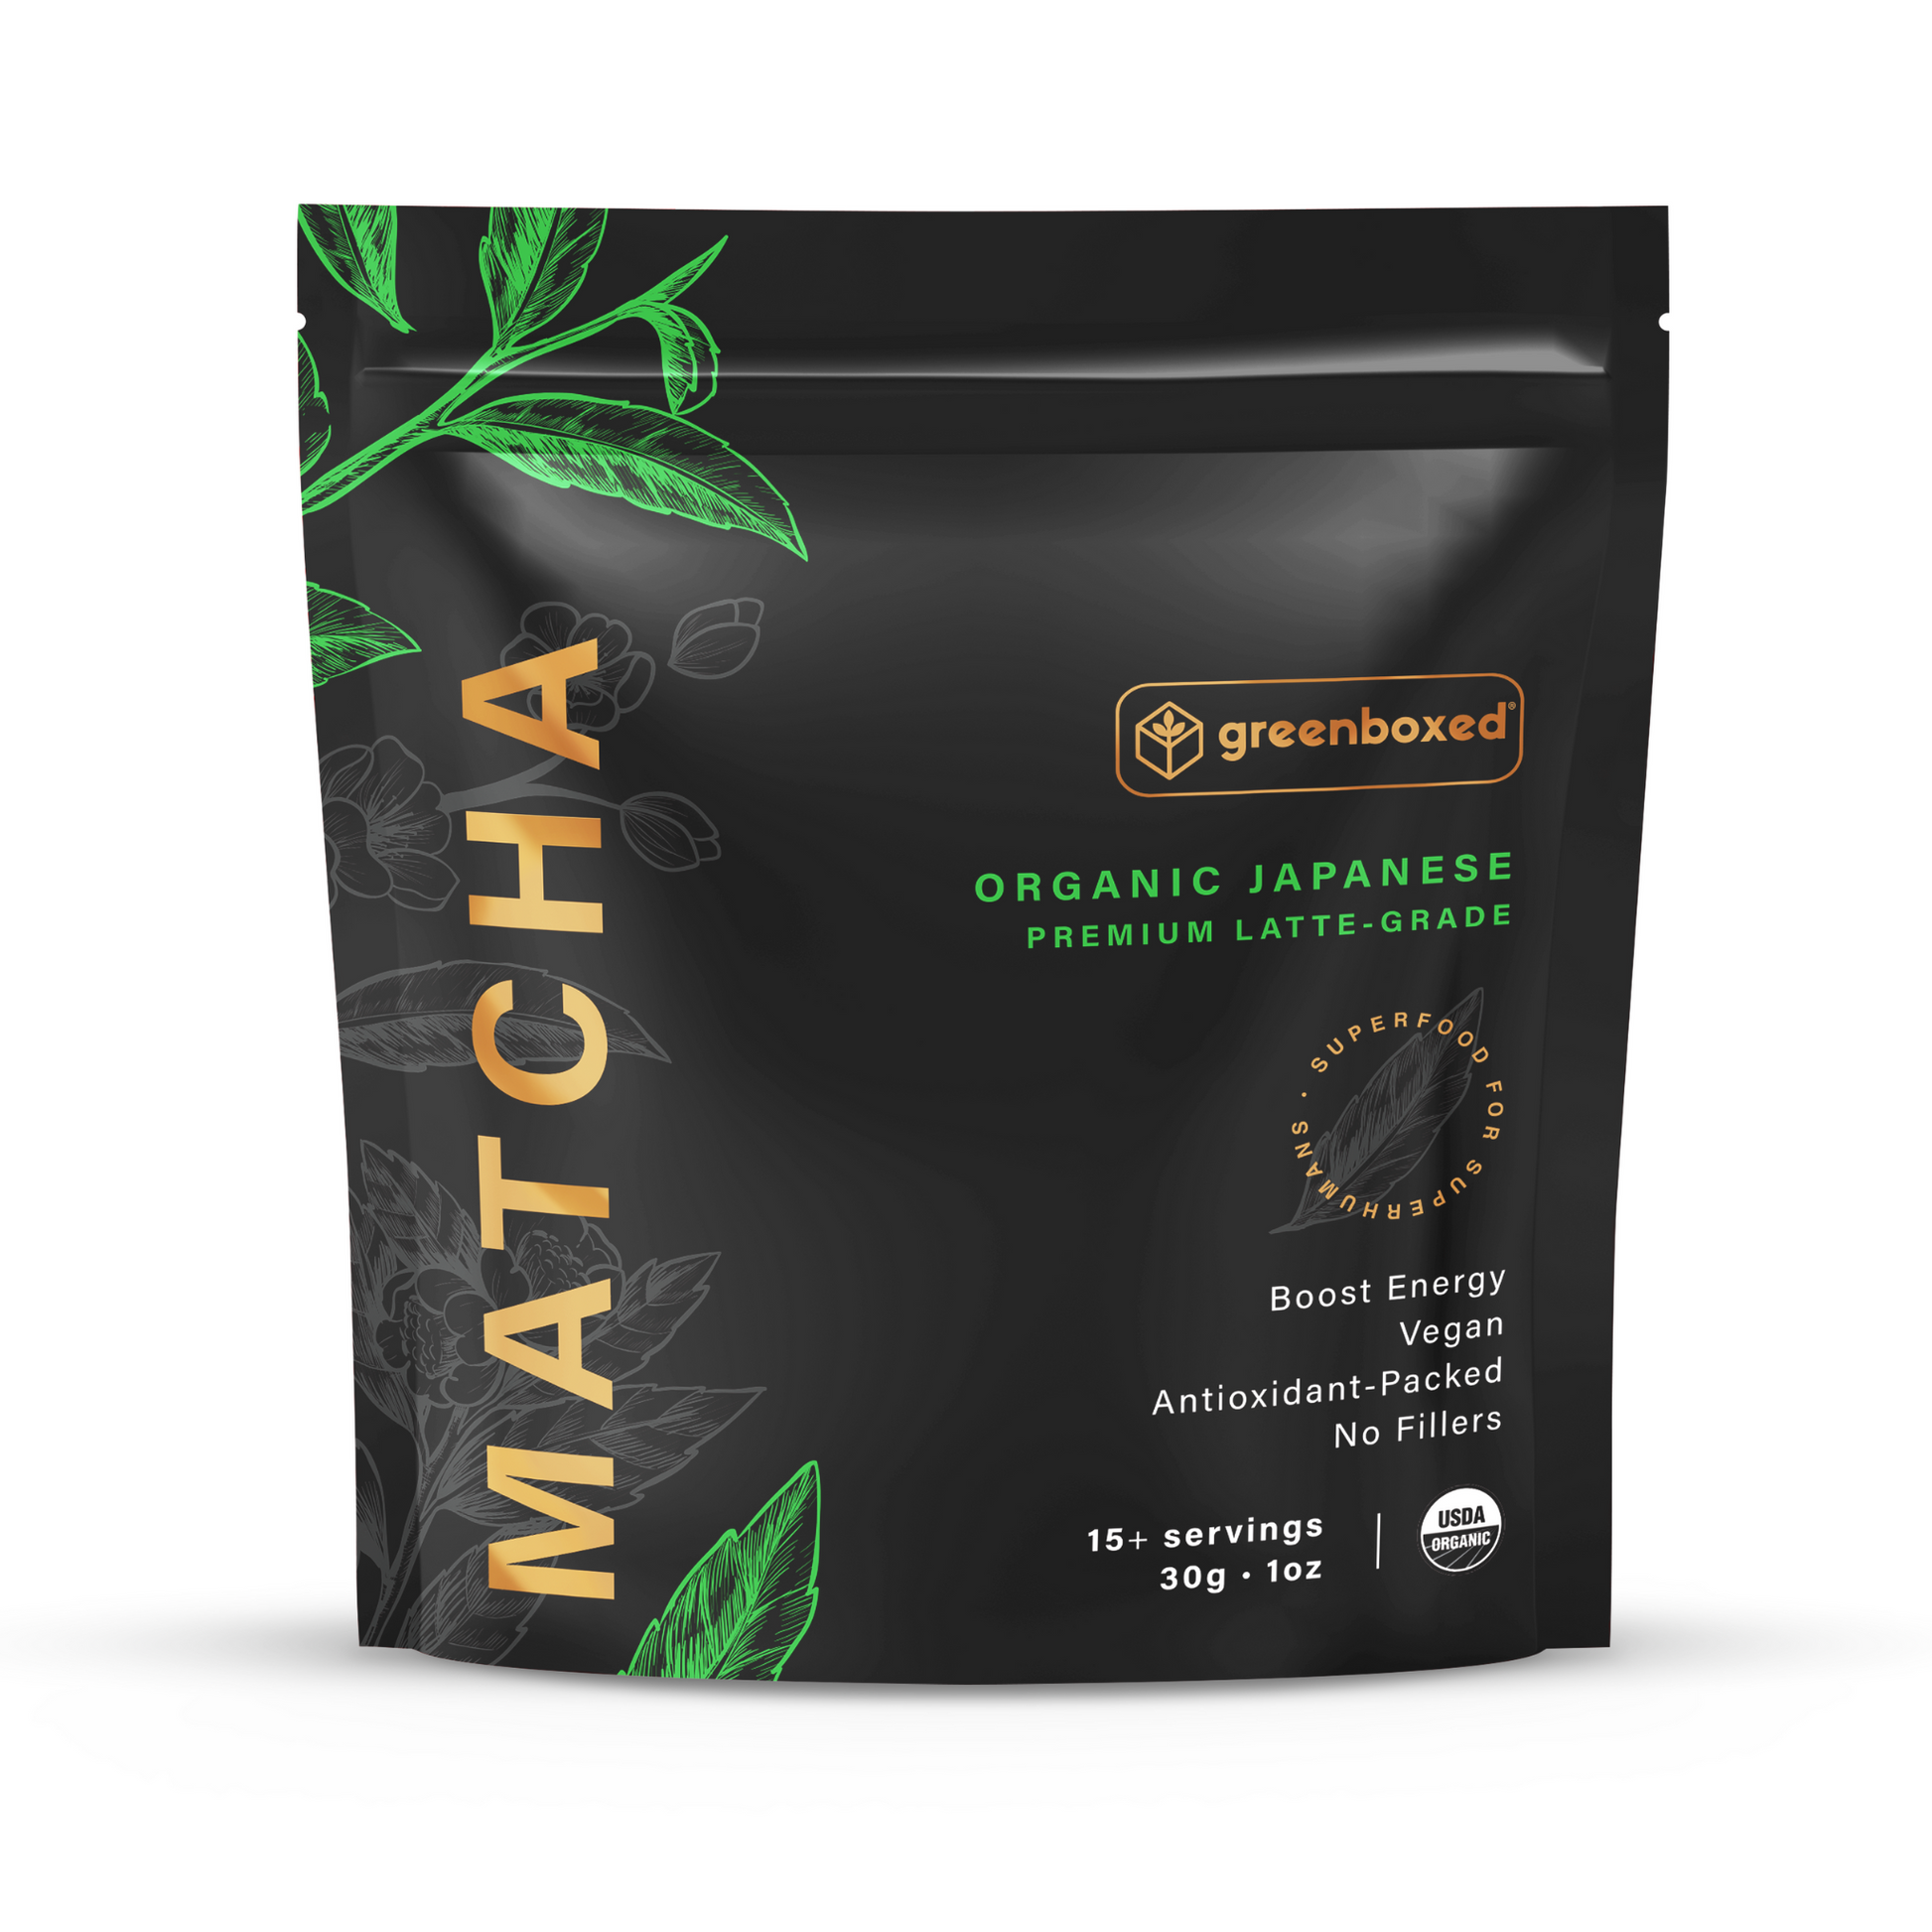 Greenboxed organic Japanese matcha. Latte grade. 1oz - 30g matcha bag. Black pouch BPA free. 15 to 30 servings. Best for daily matcha lattes at home.